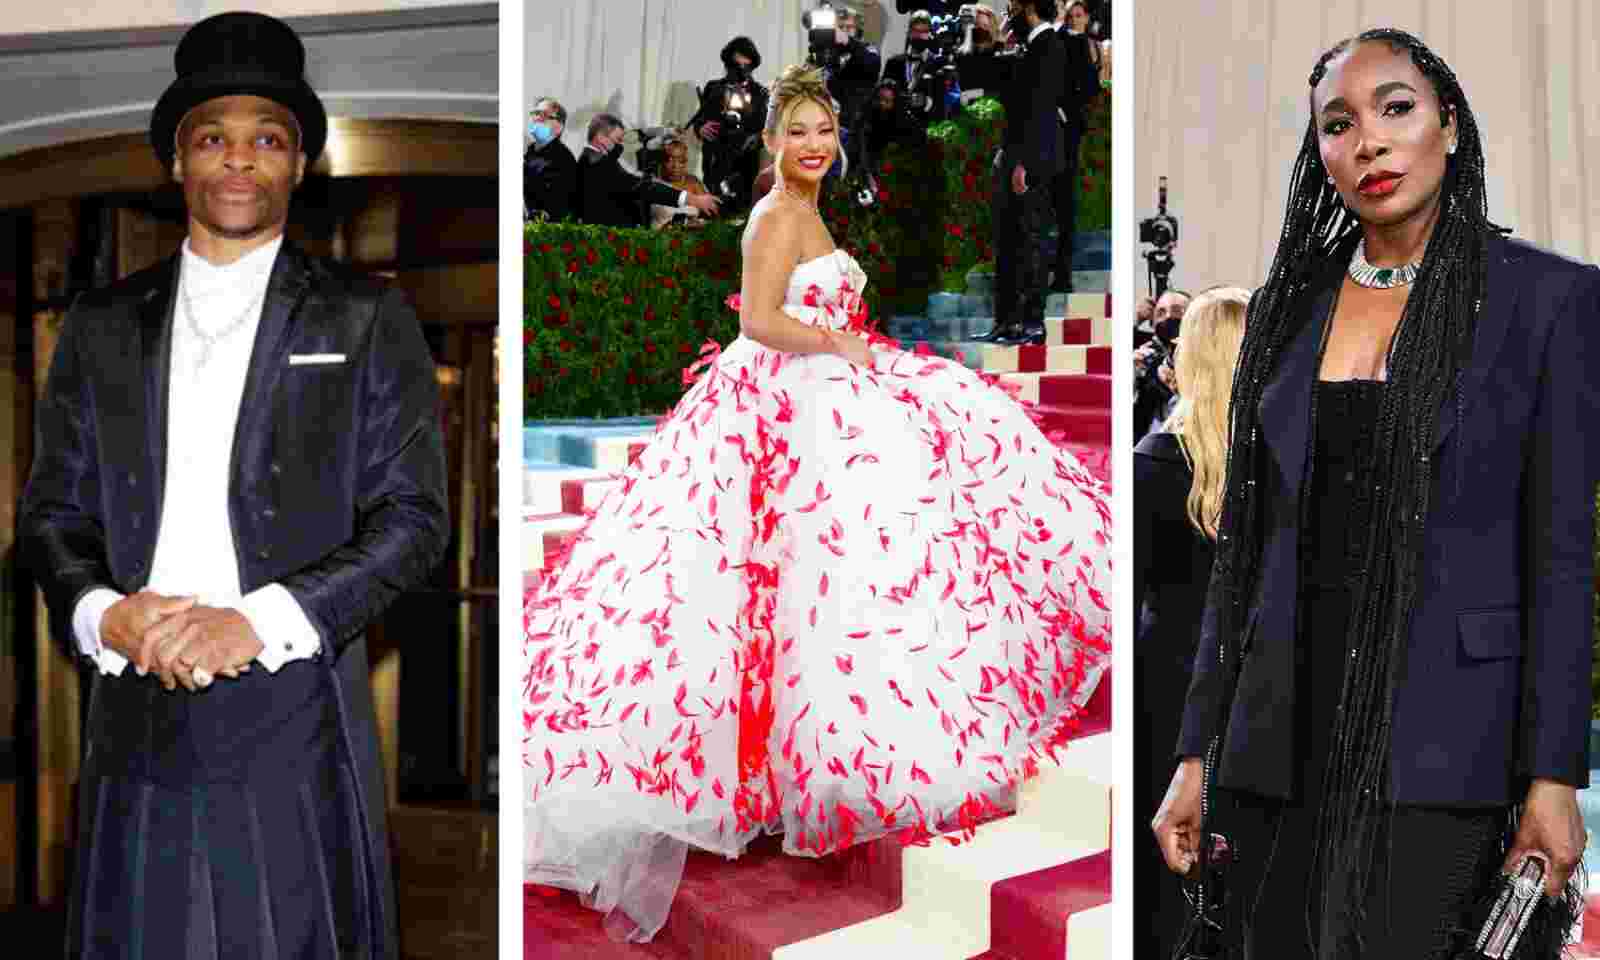 The 2022 Met Gala's Gilded Glamour Theme Winners: Who Did It Best